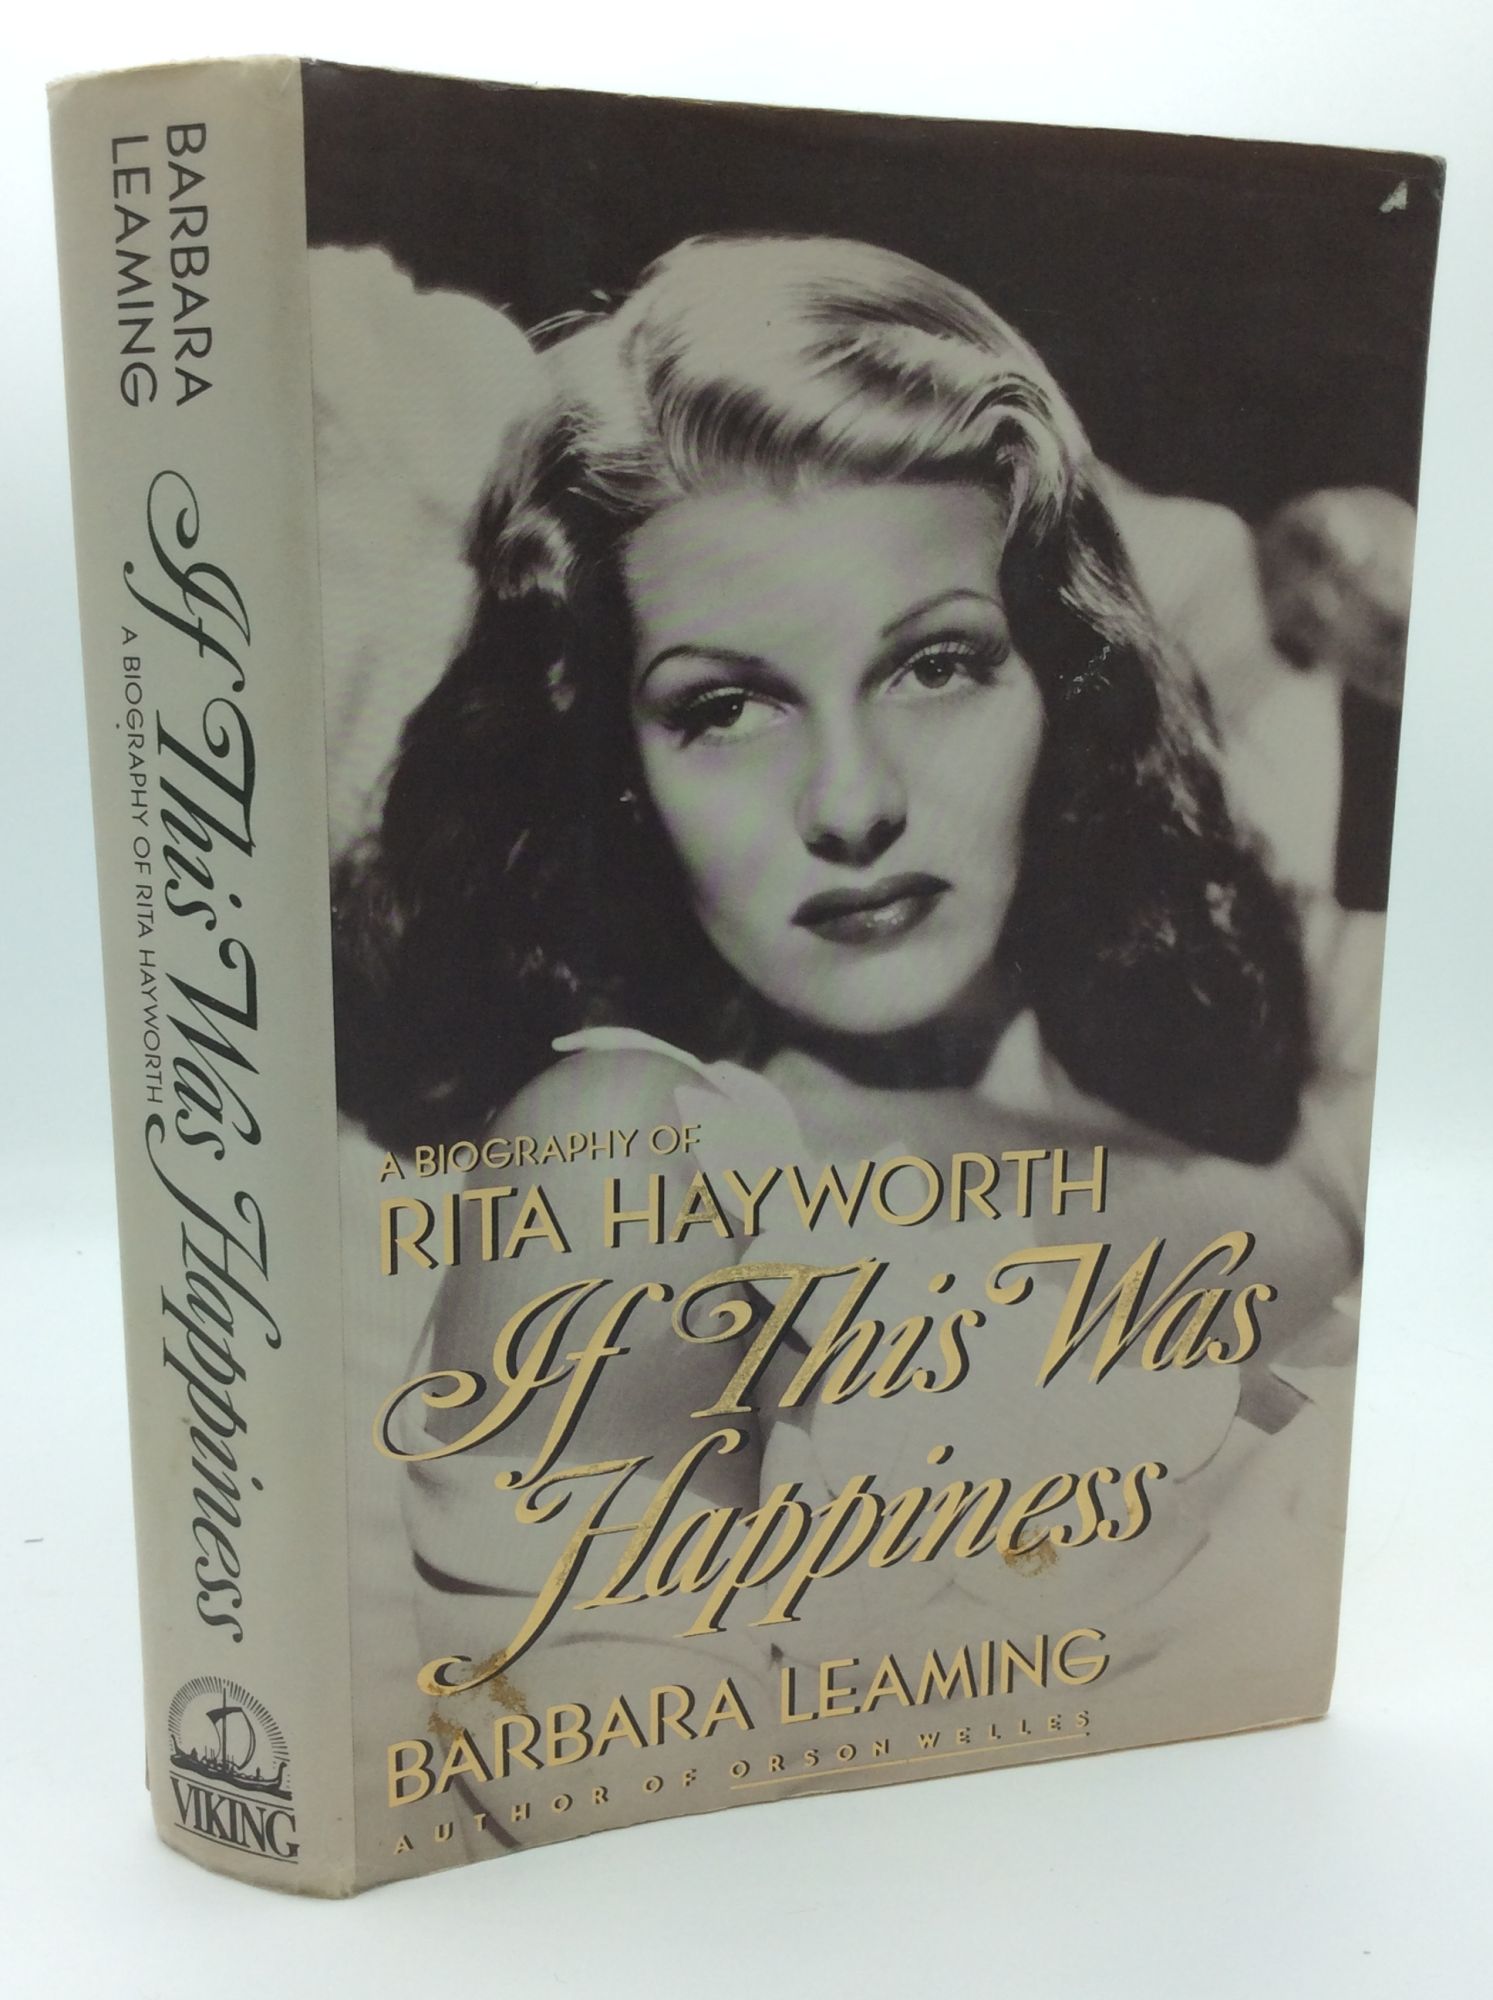 IF THIS WAS HAPPINESS: A Biography of Rita Hayworth - Barbara Leaming